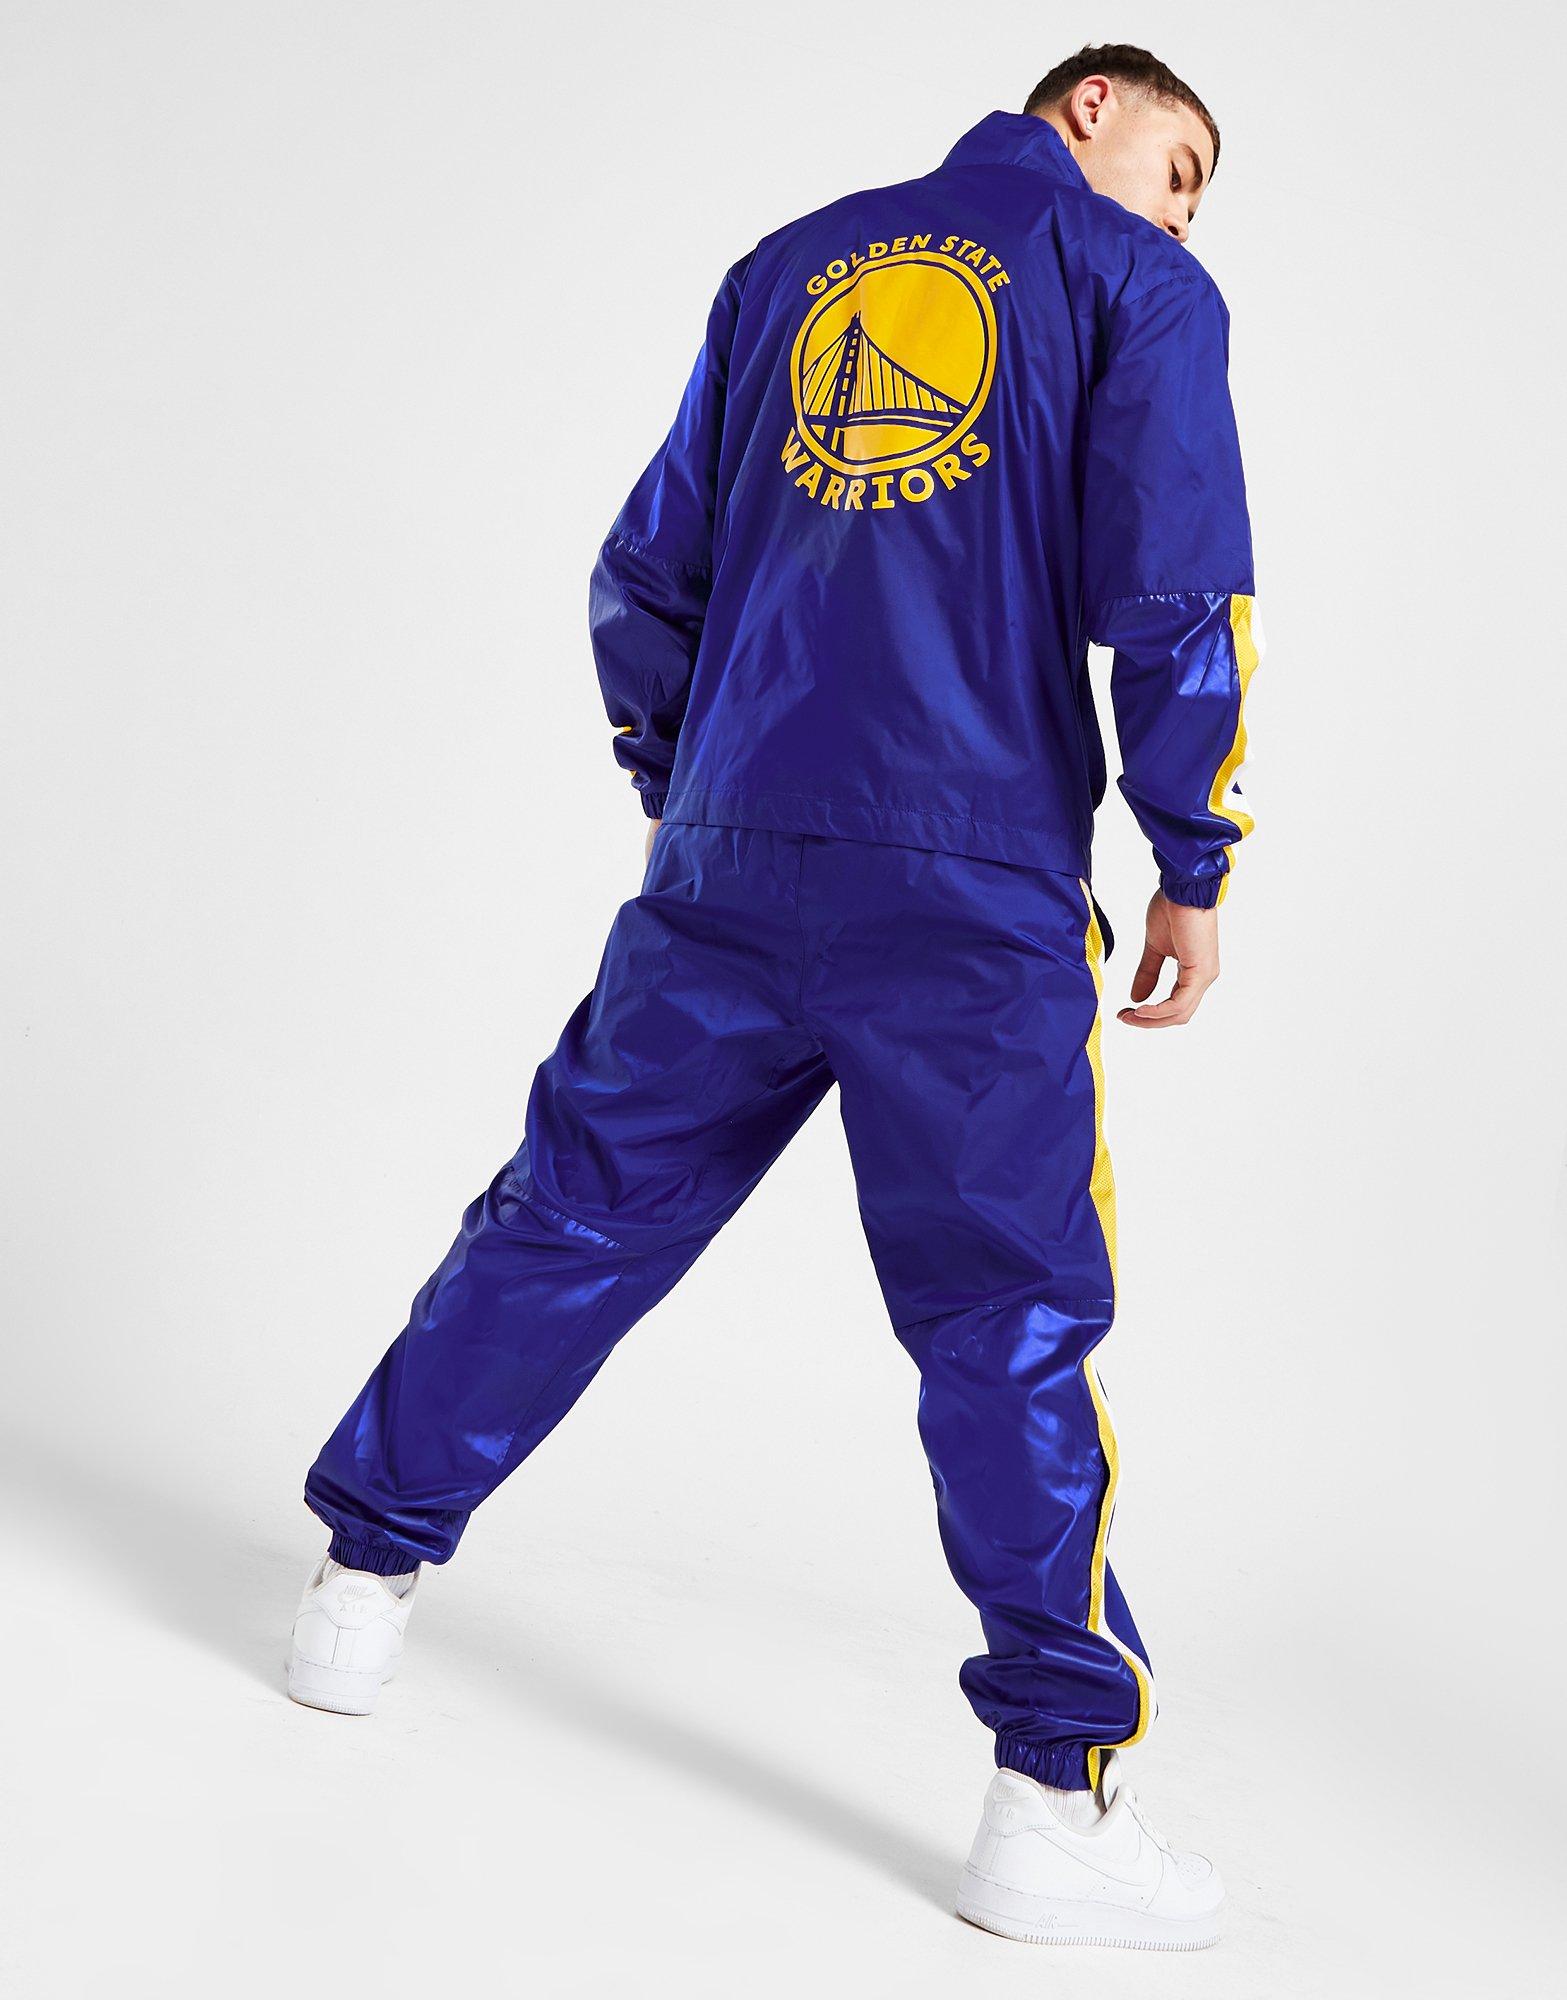 proteger Locura Excursión White Nike NBA Golden State Warriors Courtside Tracksuit | JD Sports Global